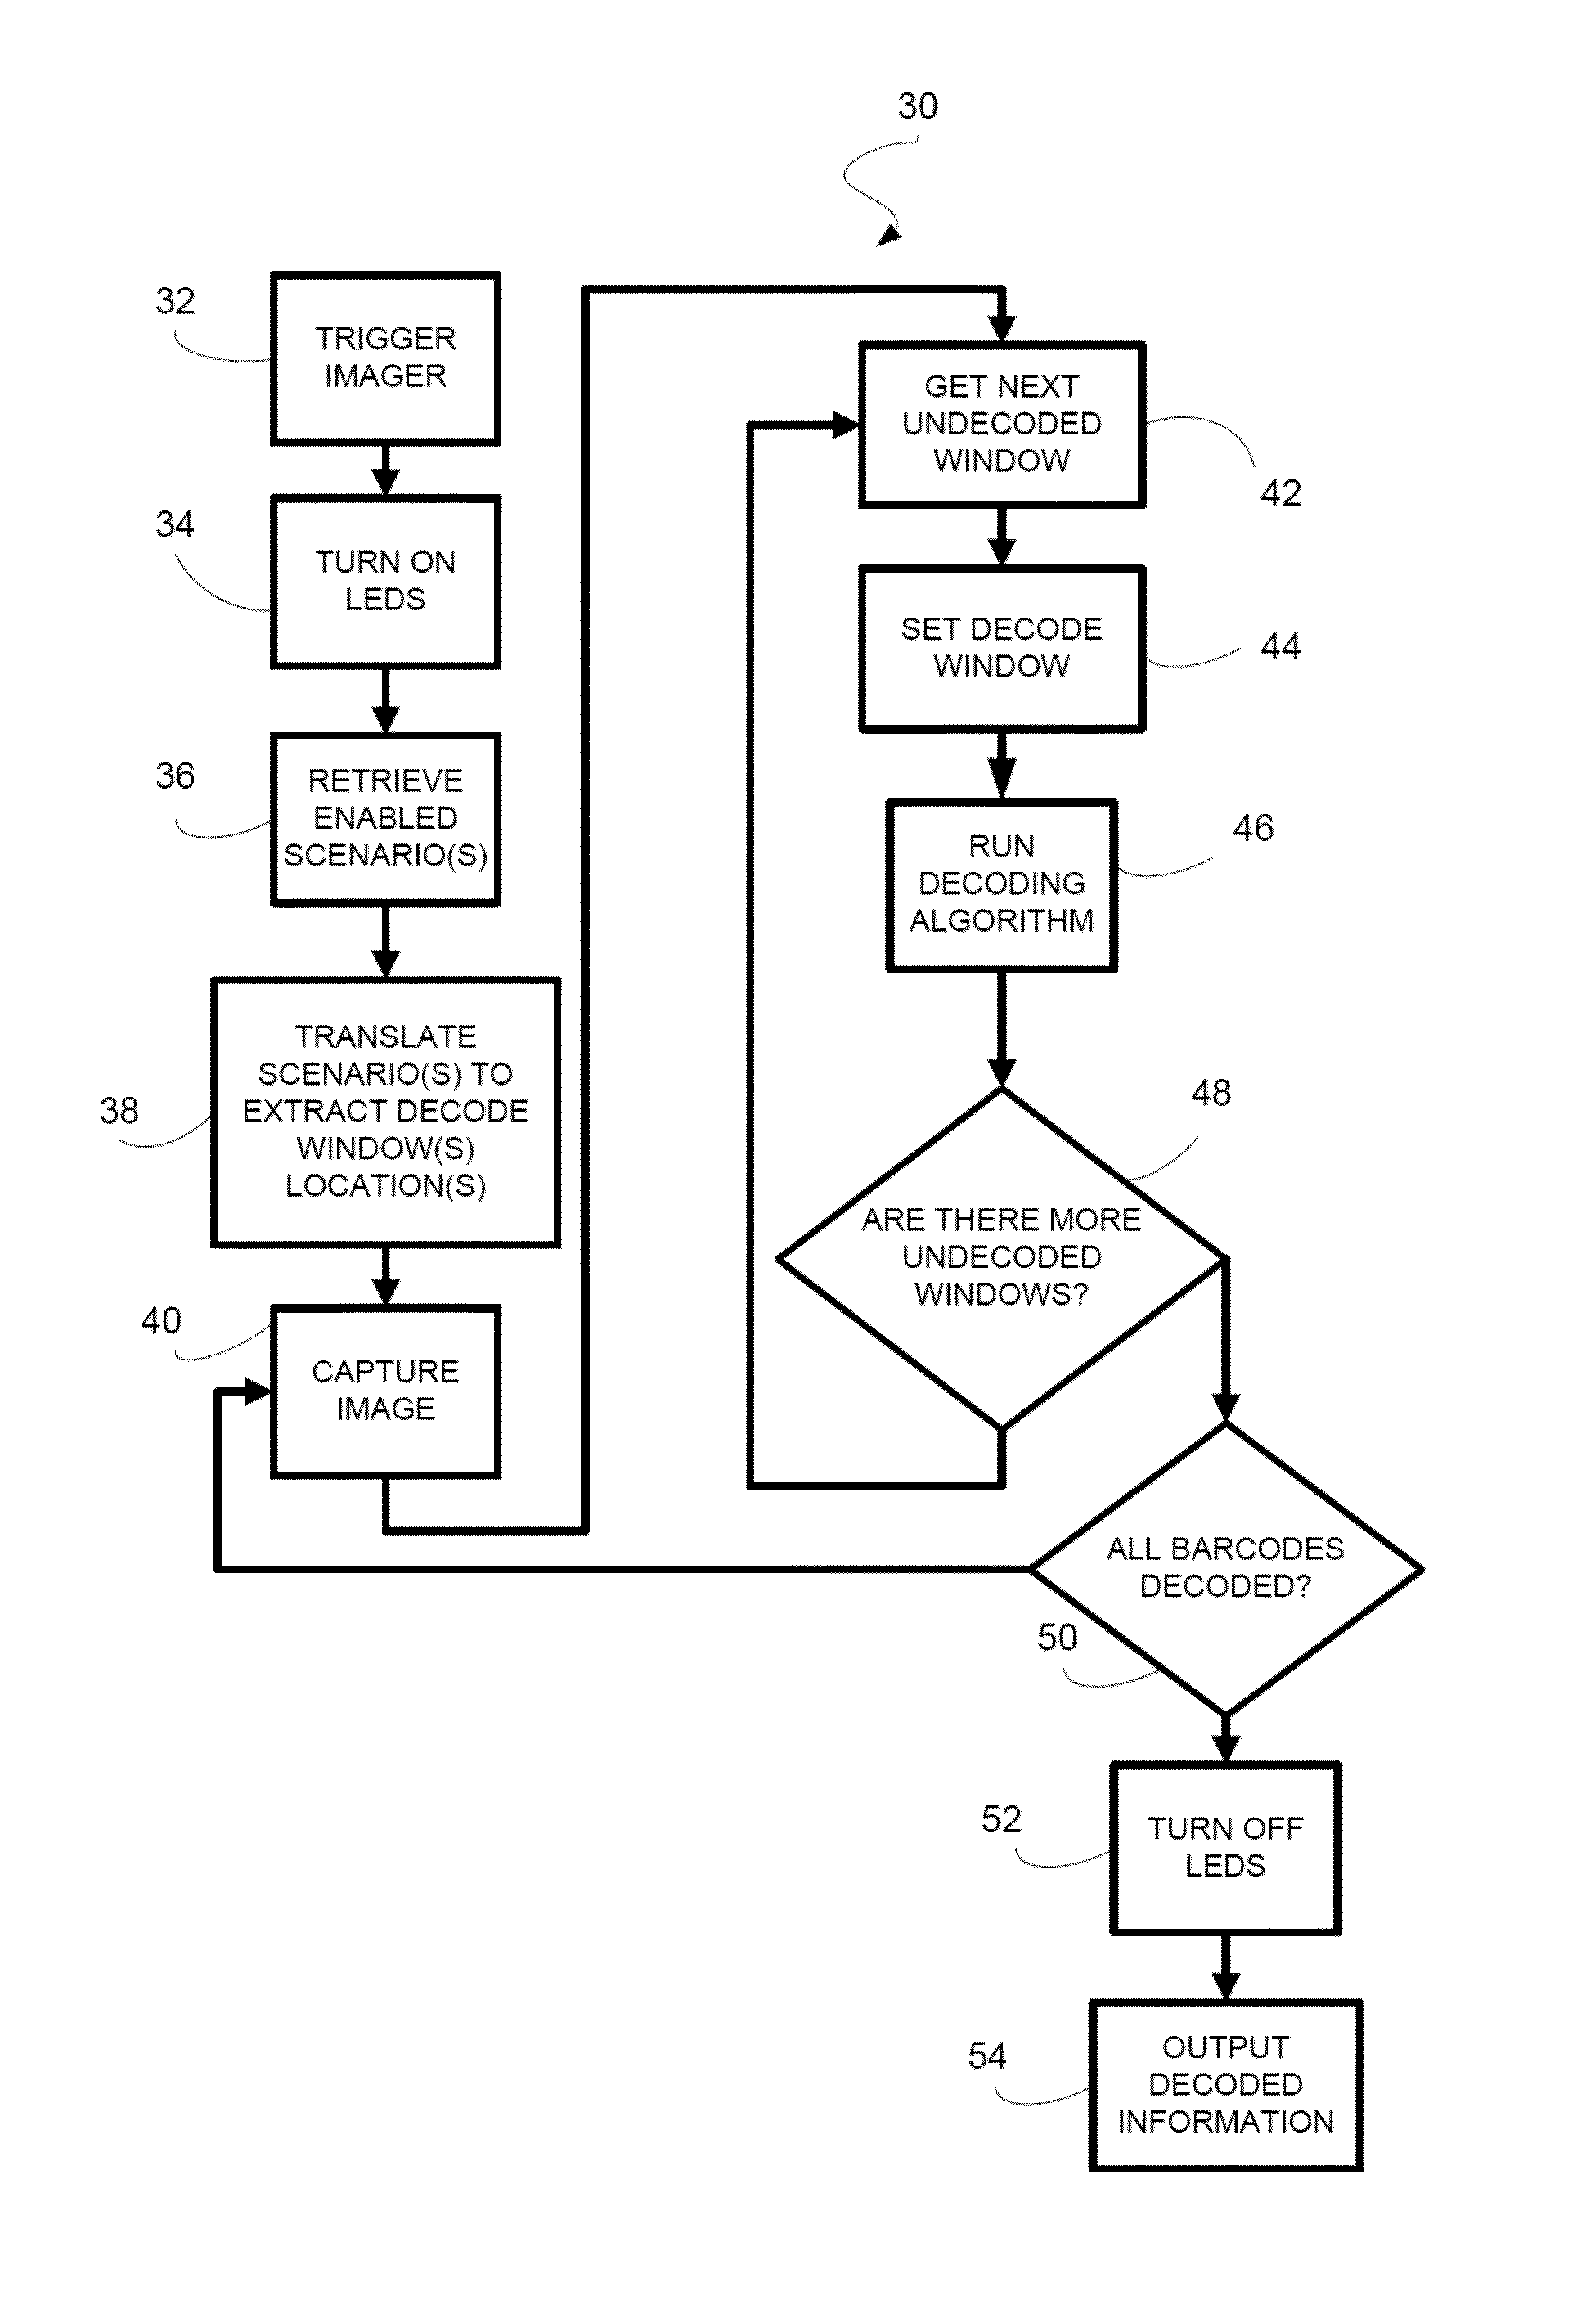 Scenario windowing for expedited decoding of multiple barcodes